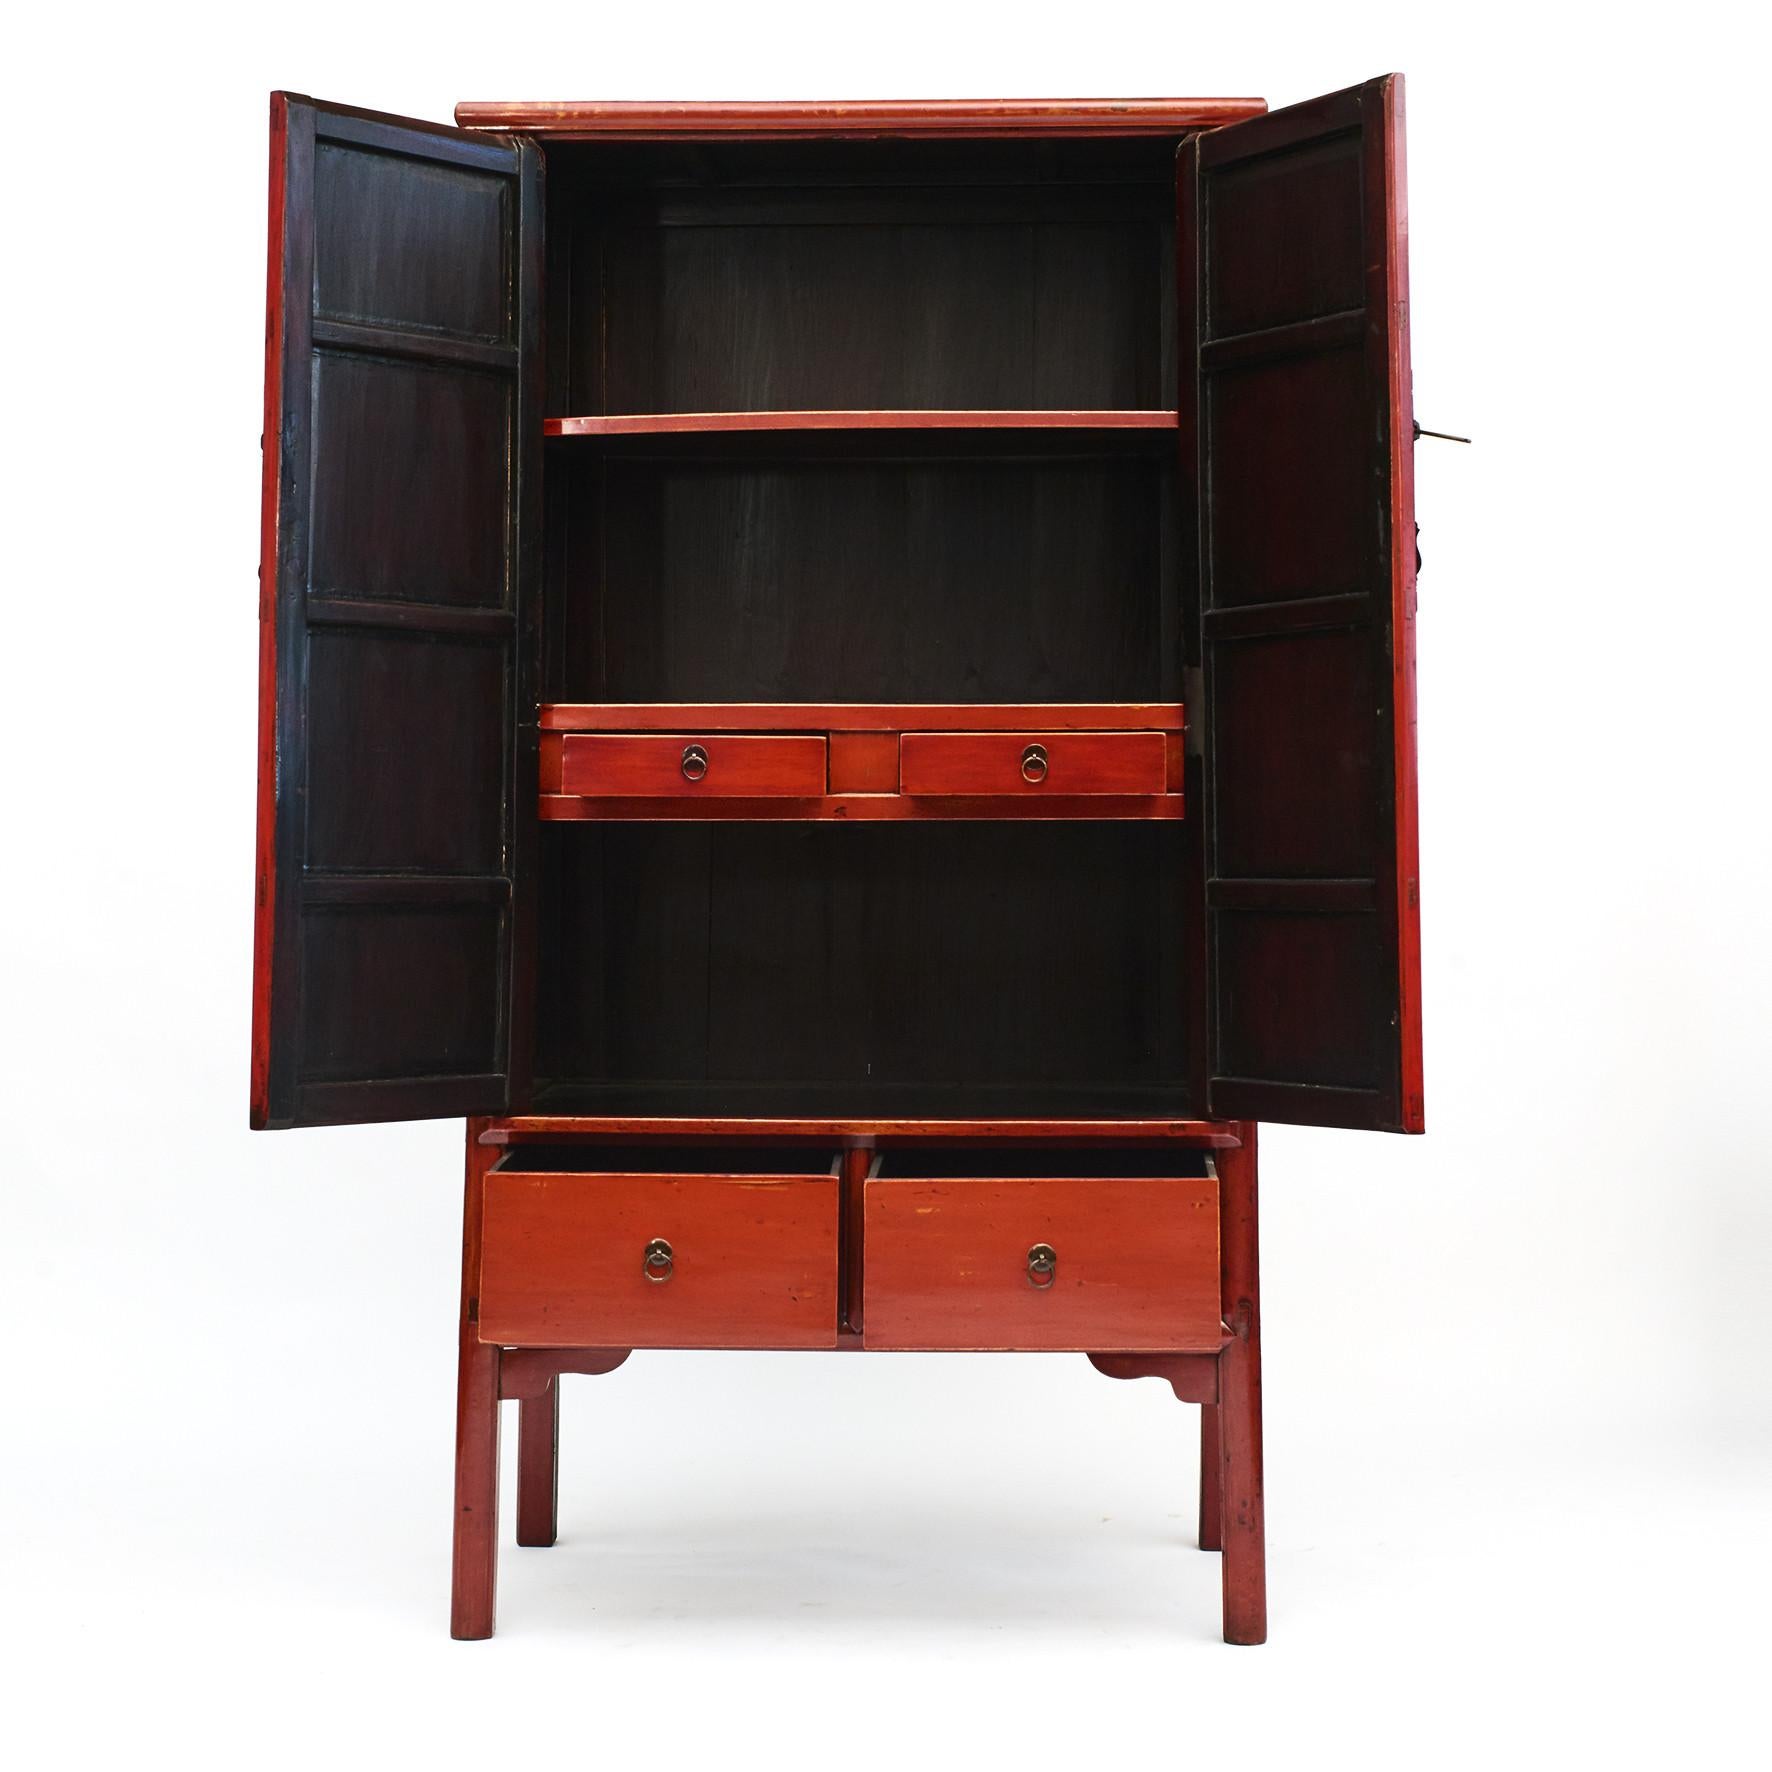 Lacquered Chinese Ming Style Cabinet with Original Red Lacquer, 1840-1860